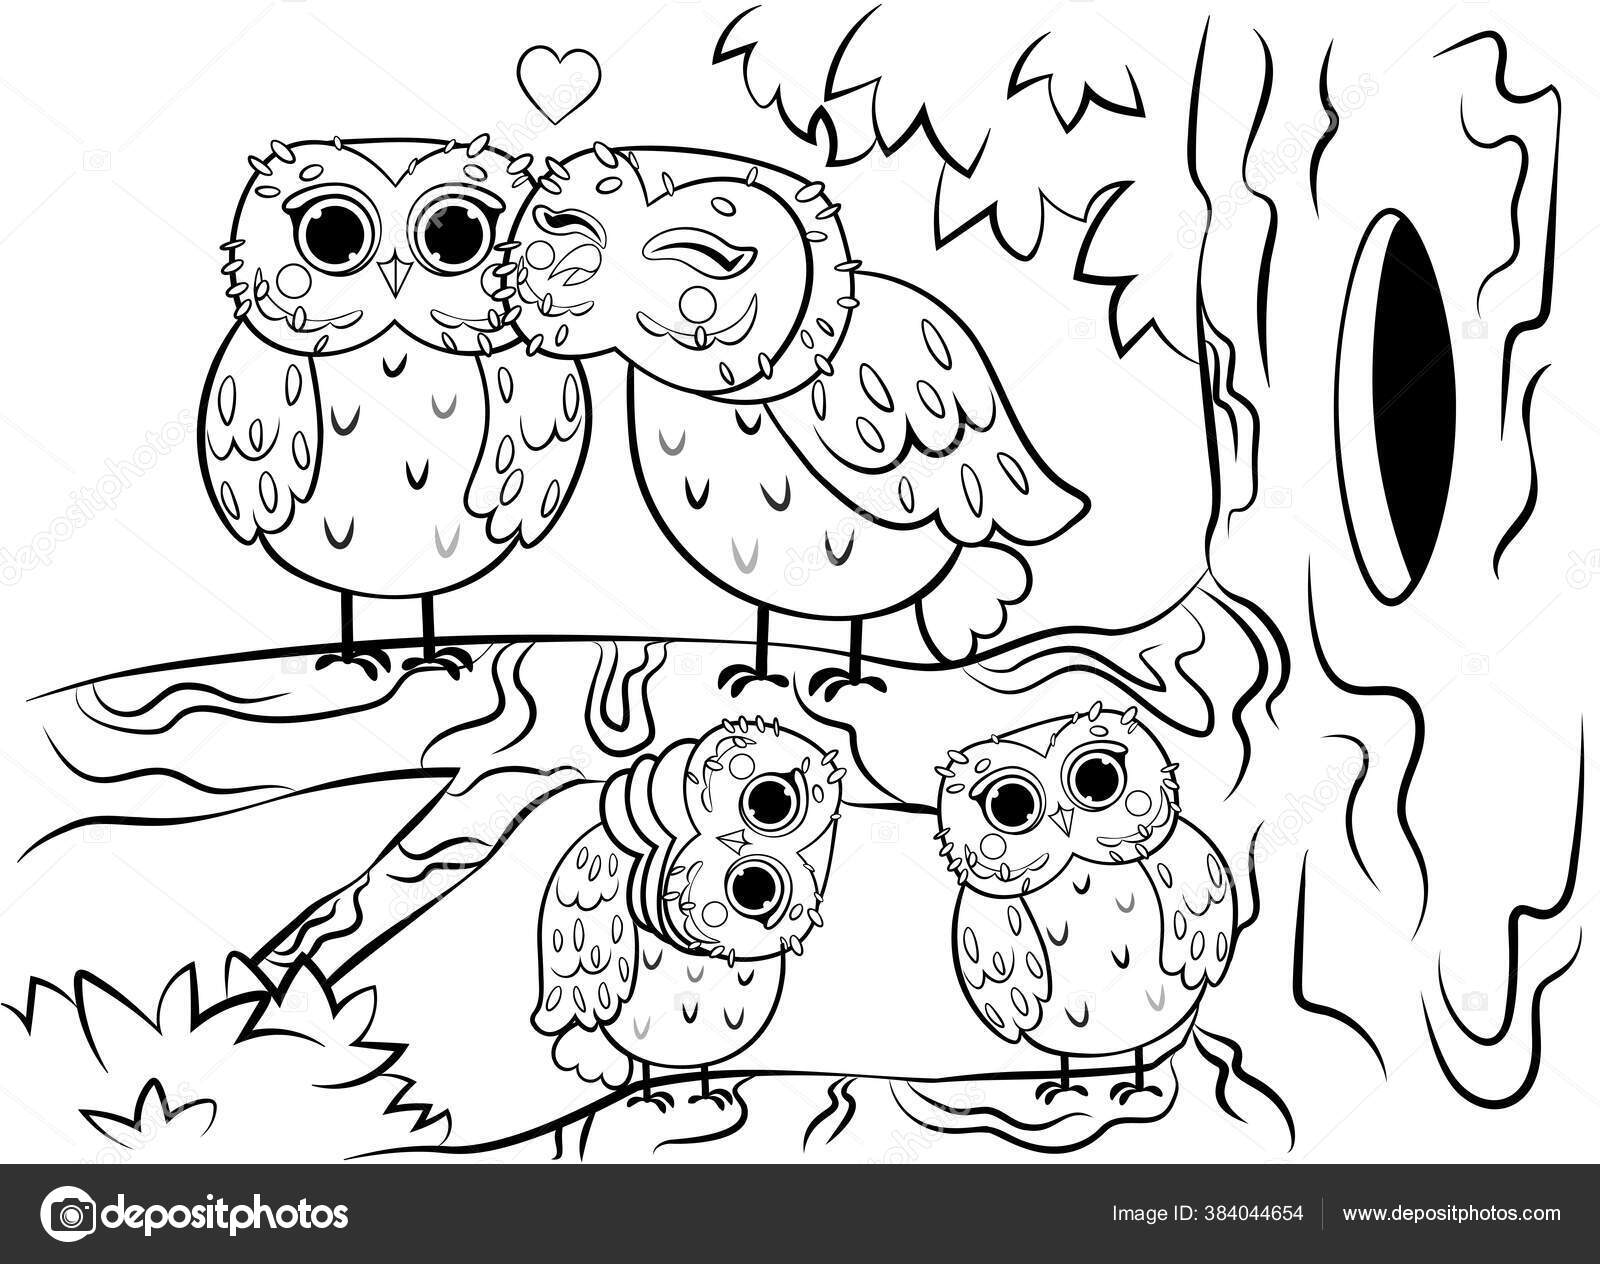 Printable coloring page outline cute cartoon owl family sitting tree stock vector by elenaparshina